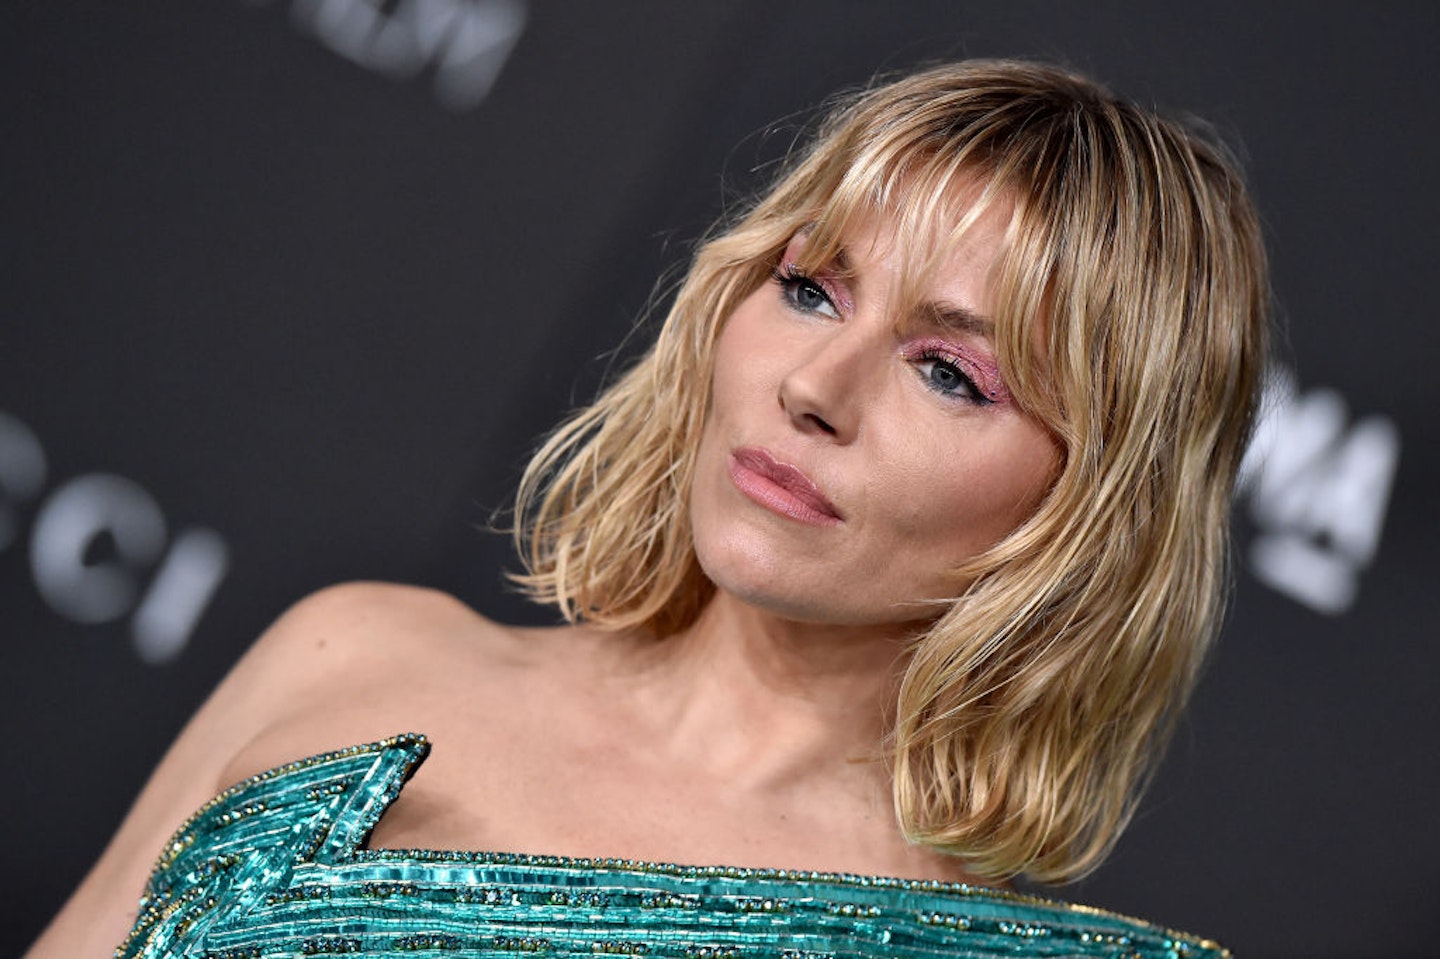 The £38 Product Behind Sienna Miller's New Hair | Grazia